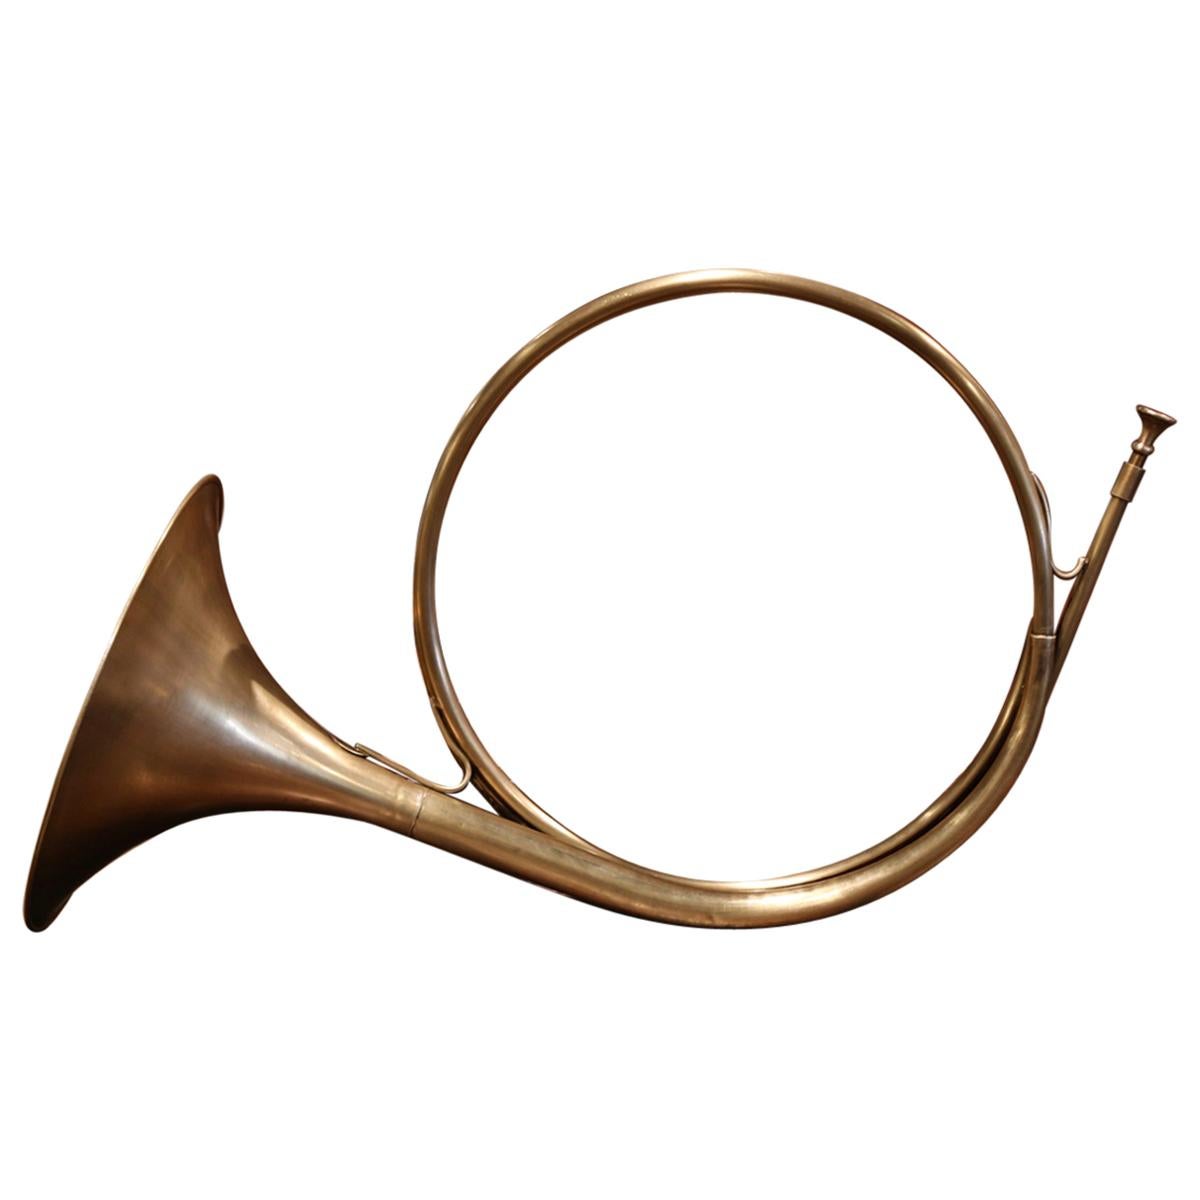 Early 20th Century French Brass "Cor de Chasse" Hunting Horn